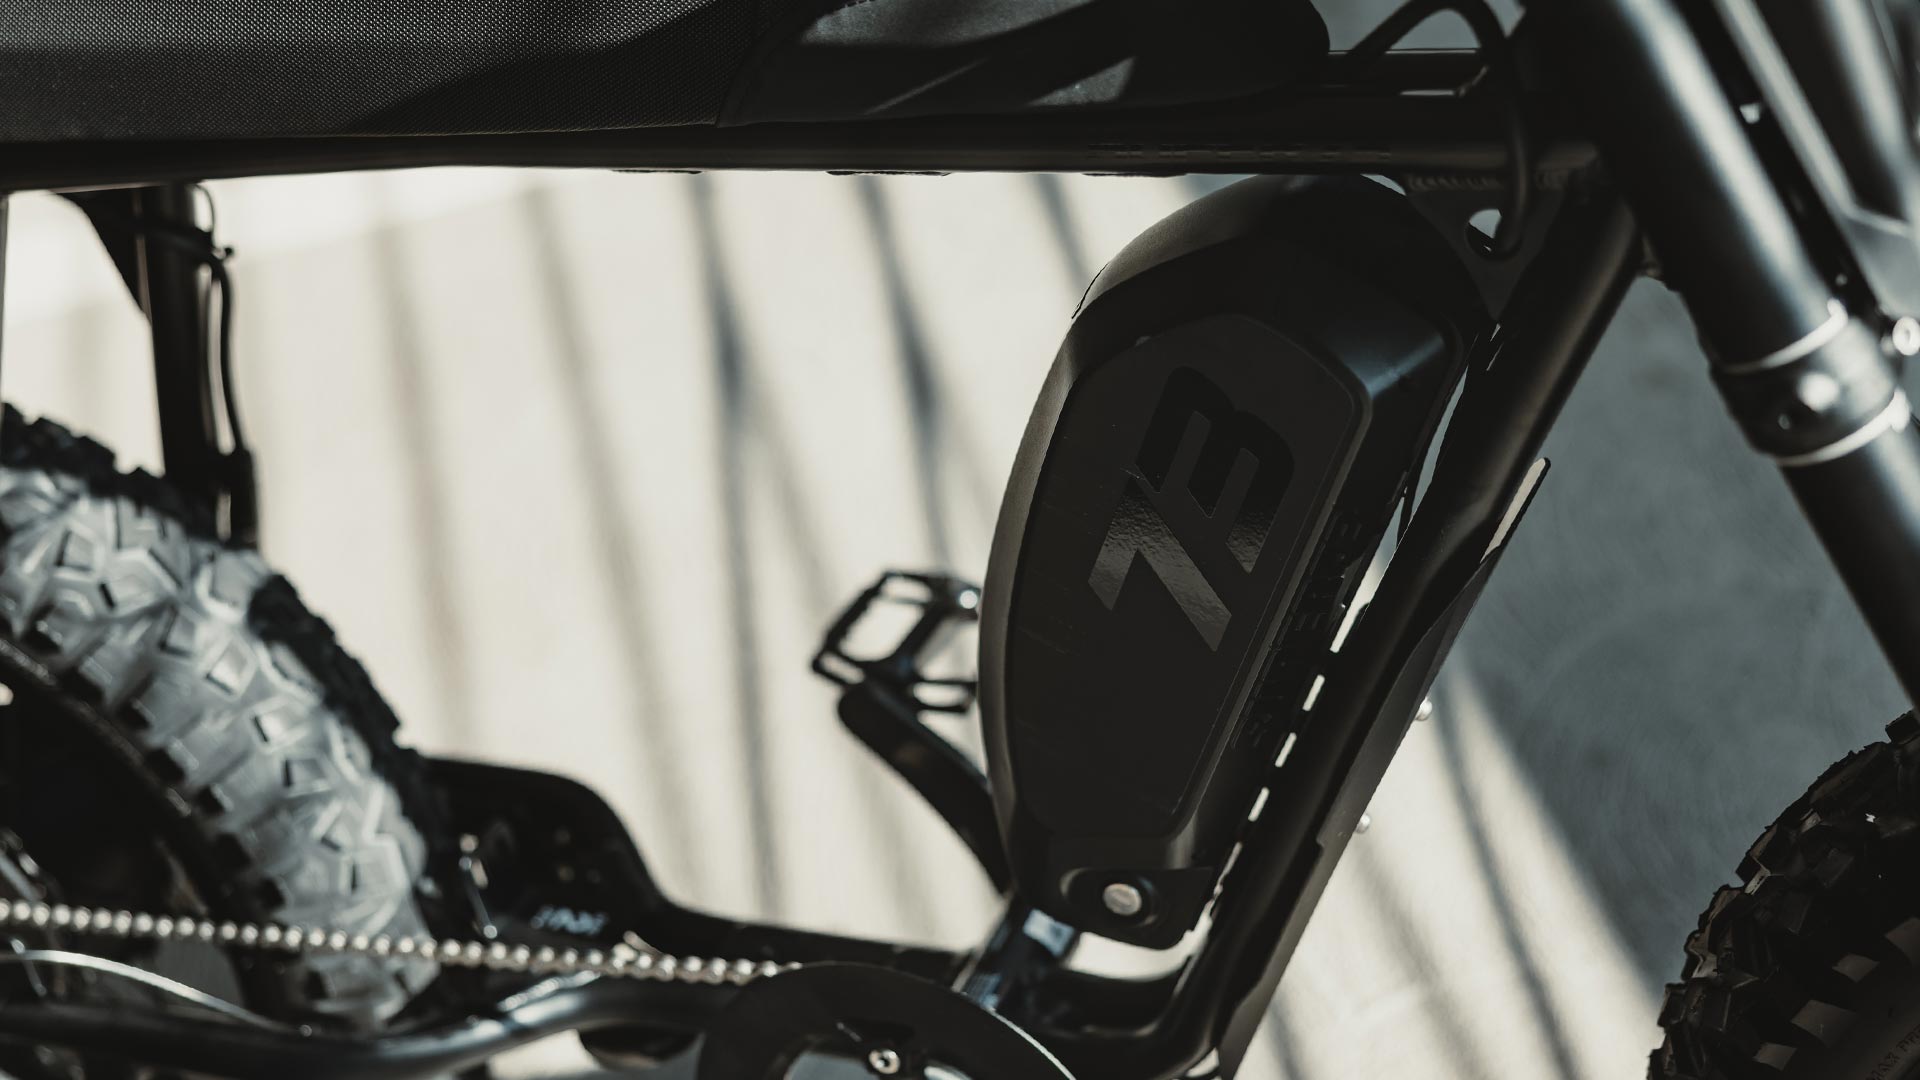 Close-up image of the removable battery on the SUPER73-S Blackout SE ebike.